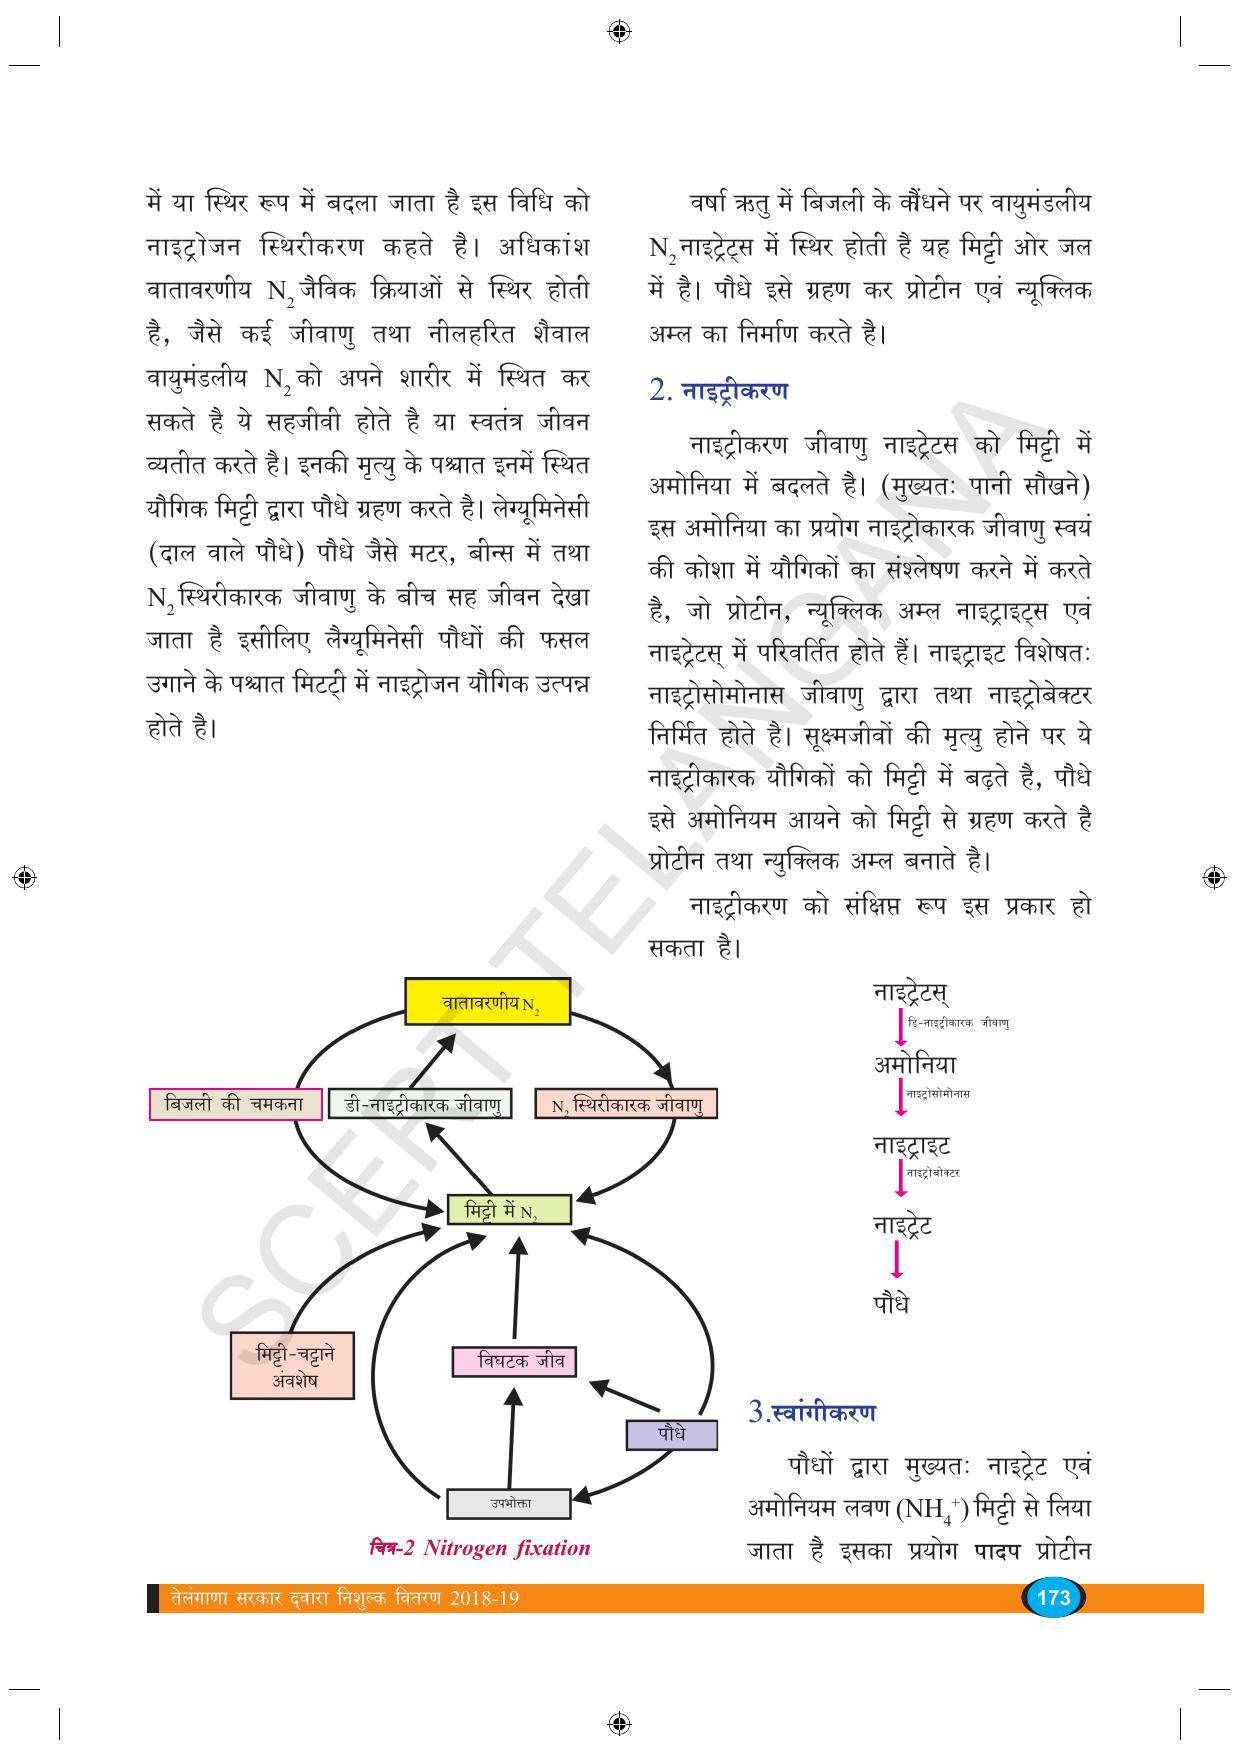 TS SCERT Class 9 Biological Science (Hindi Medium) Text Book - Page 185